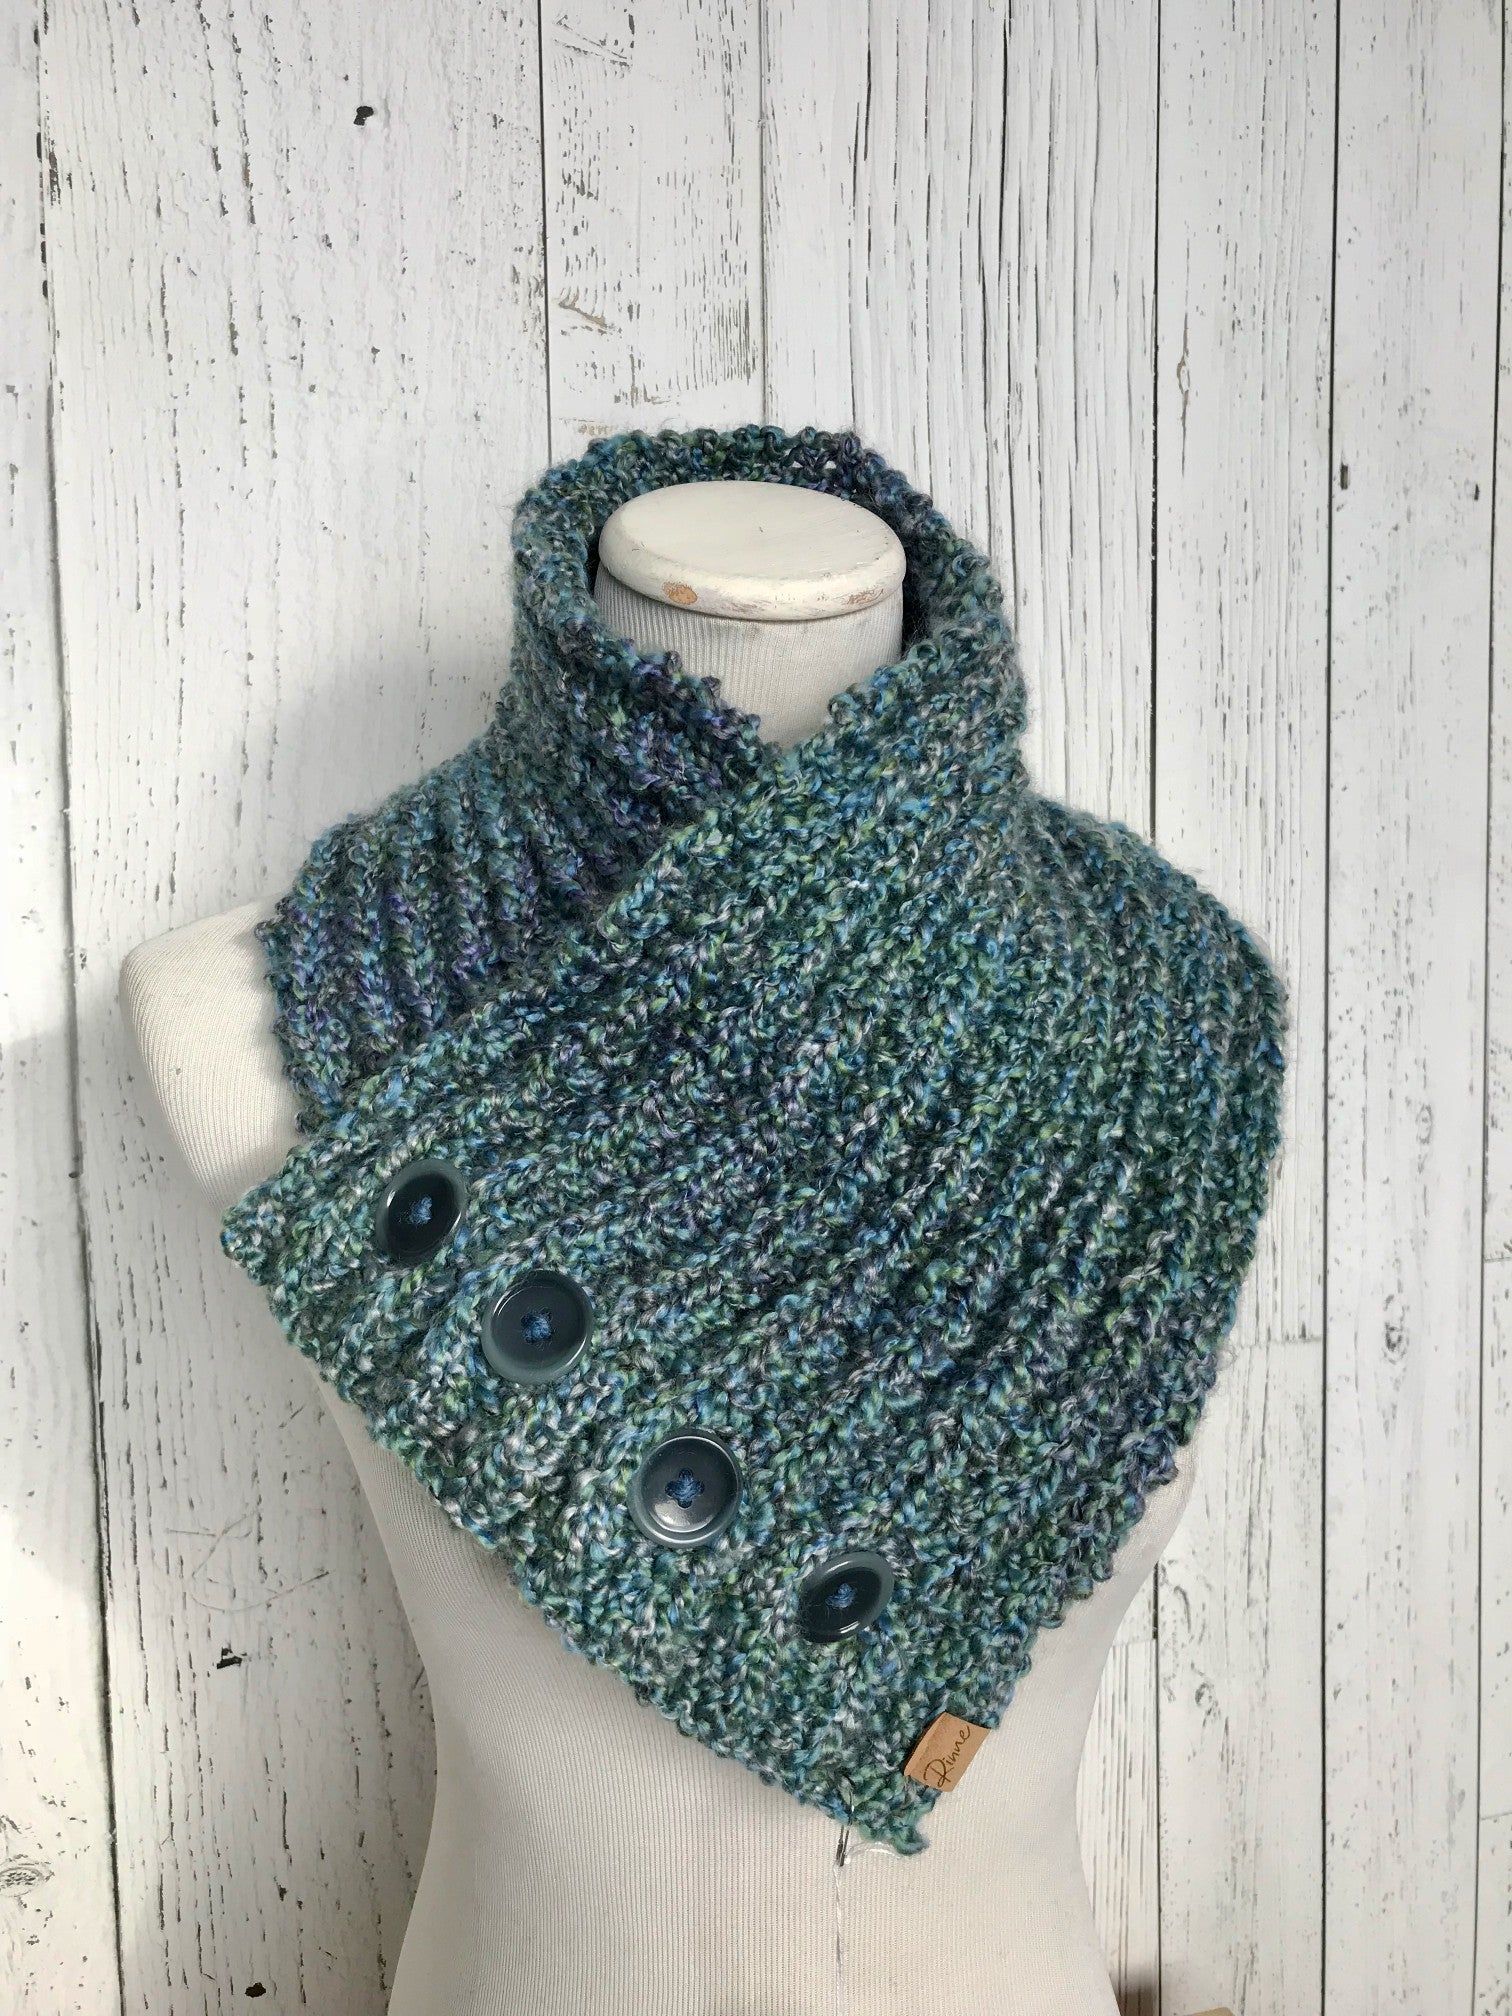 Classic Knit Button Cowl in blues and greens with dark teal buttons